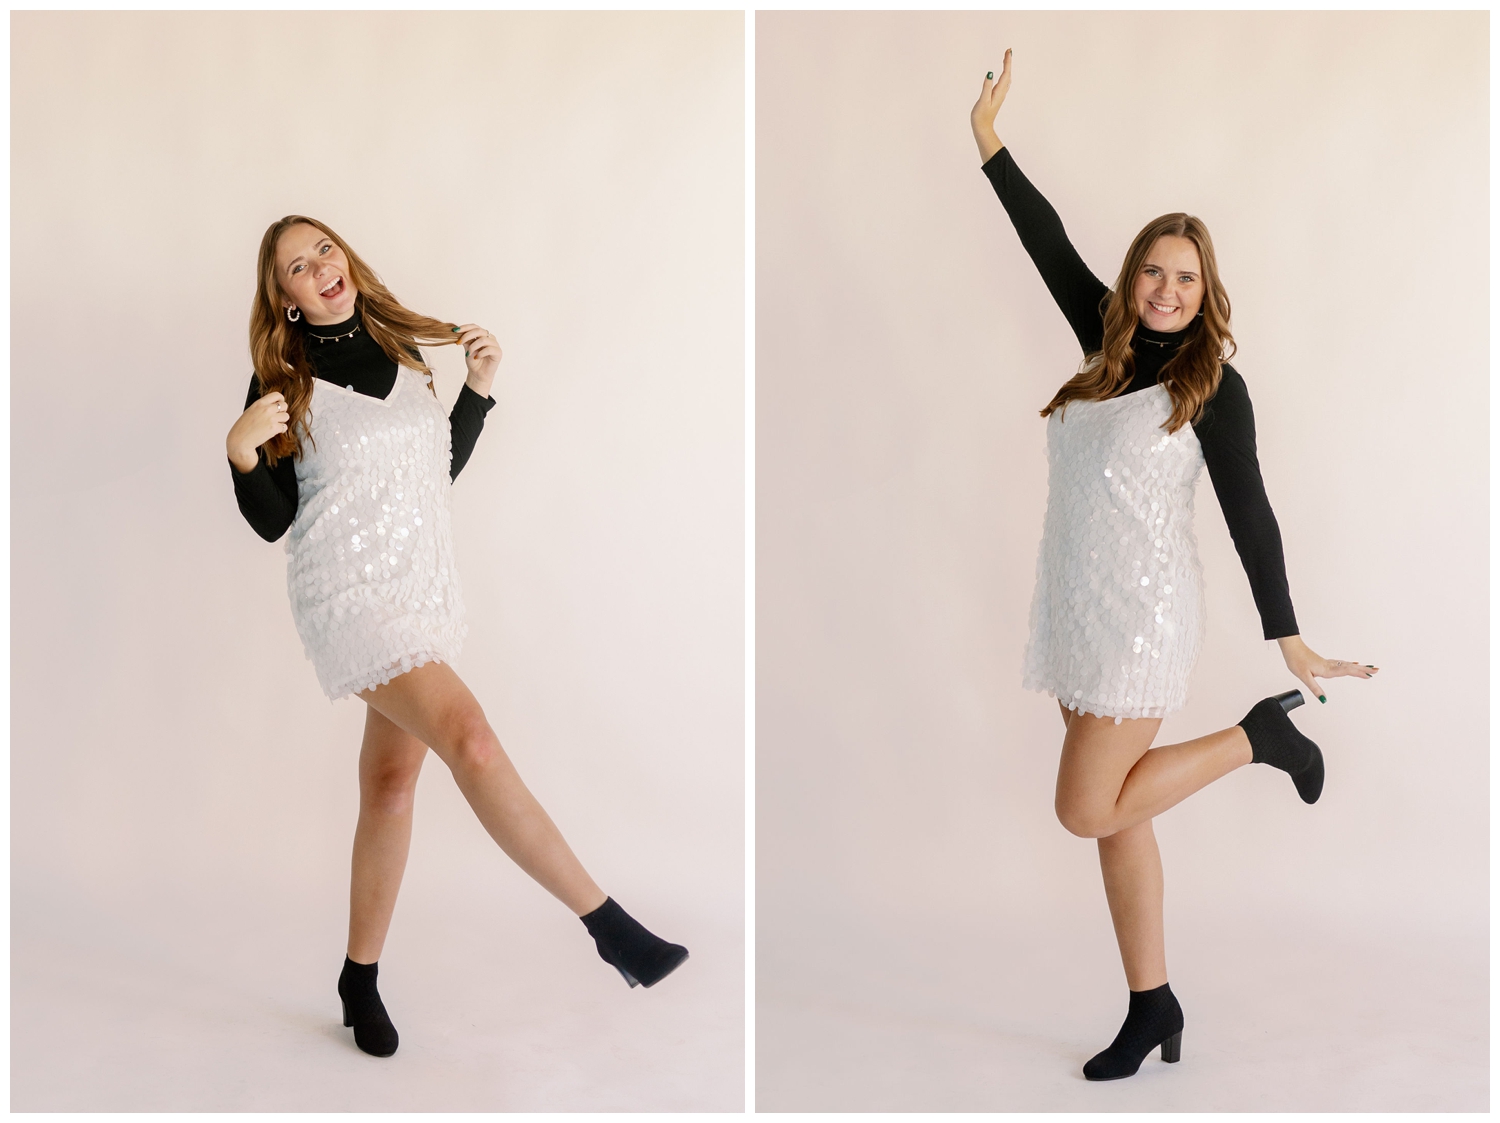 high school senior girl in white sequence dress with black turtleneck kicking legs out and smiling for New Years senior pictures